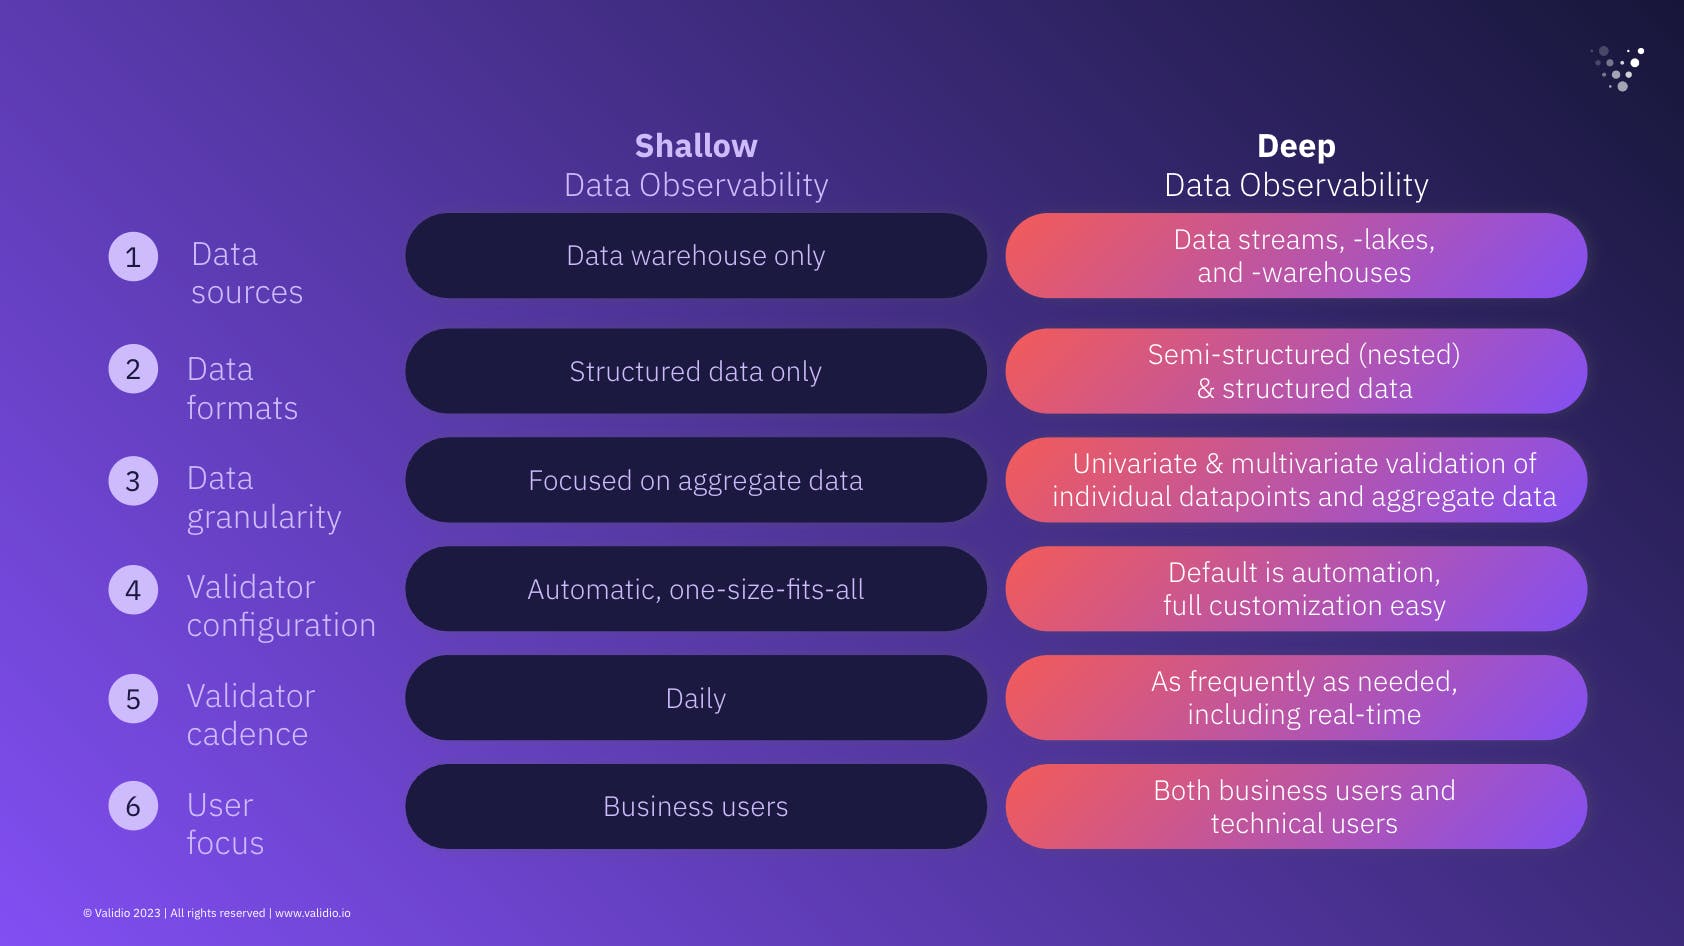 The six dimensions used to distinguish Shallow Data Observability from Deep Data Observability.